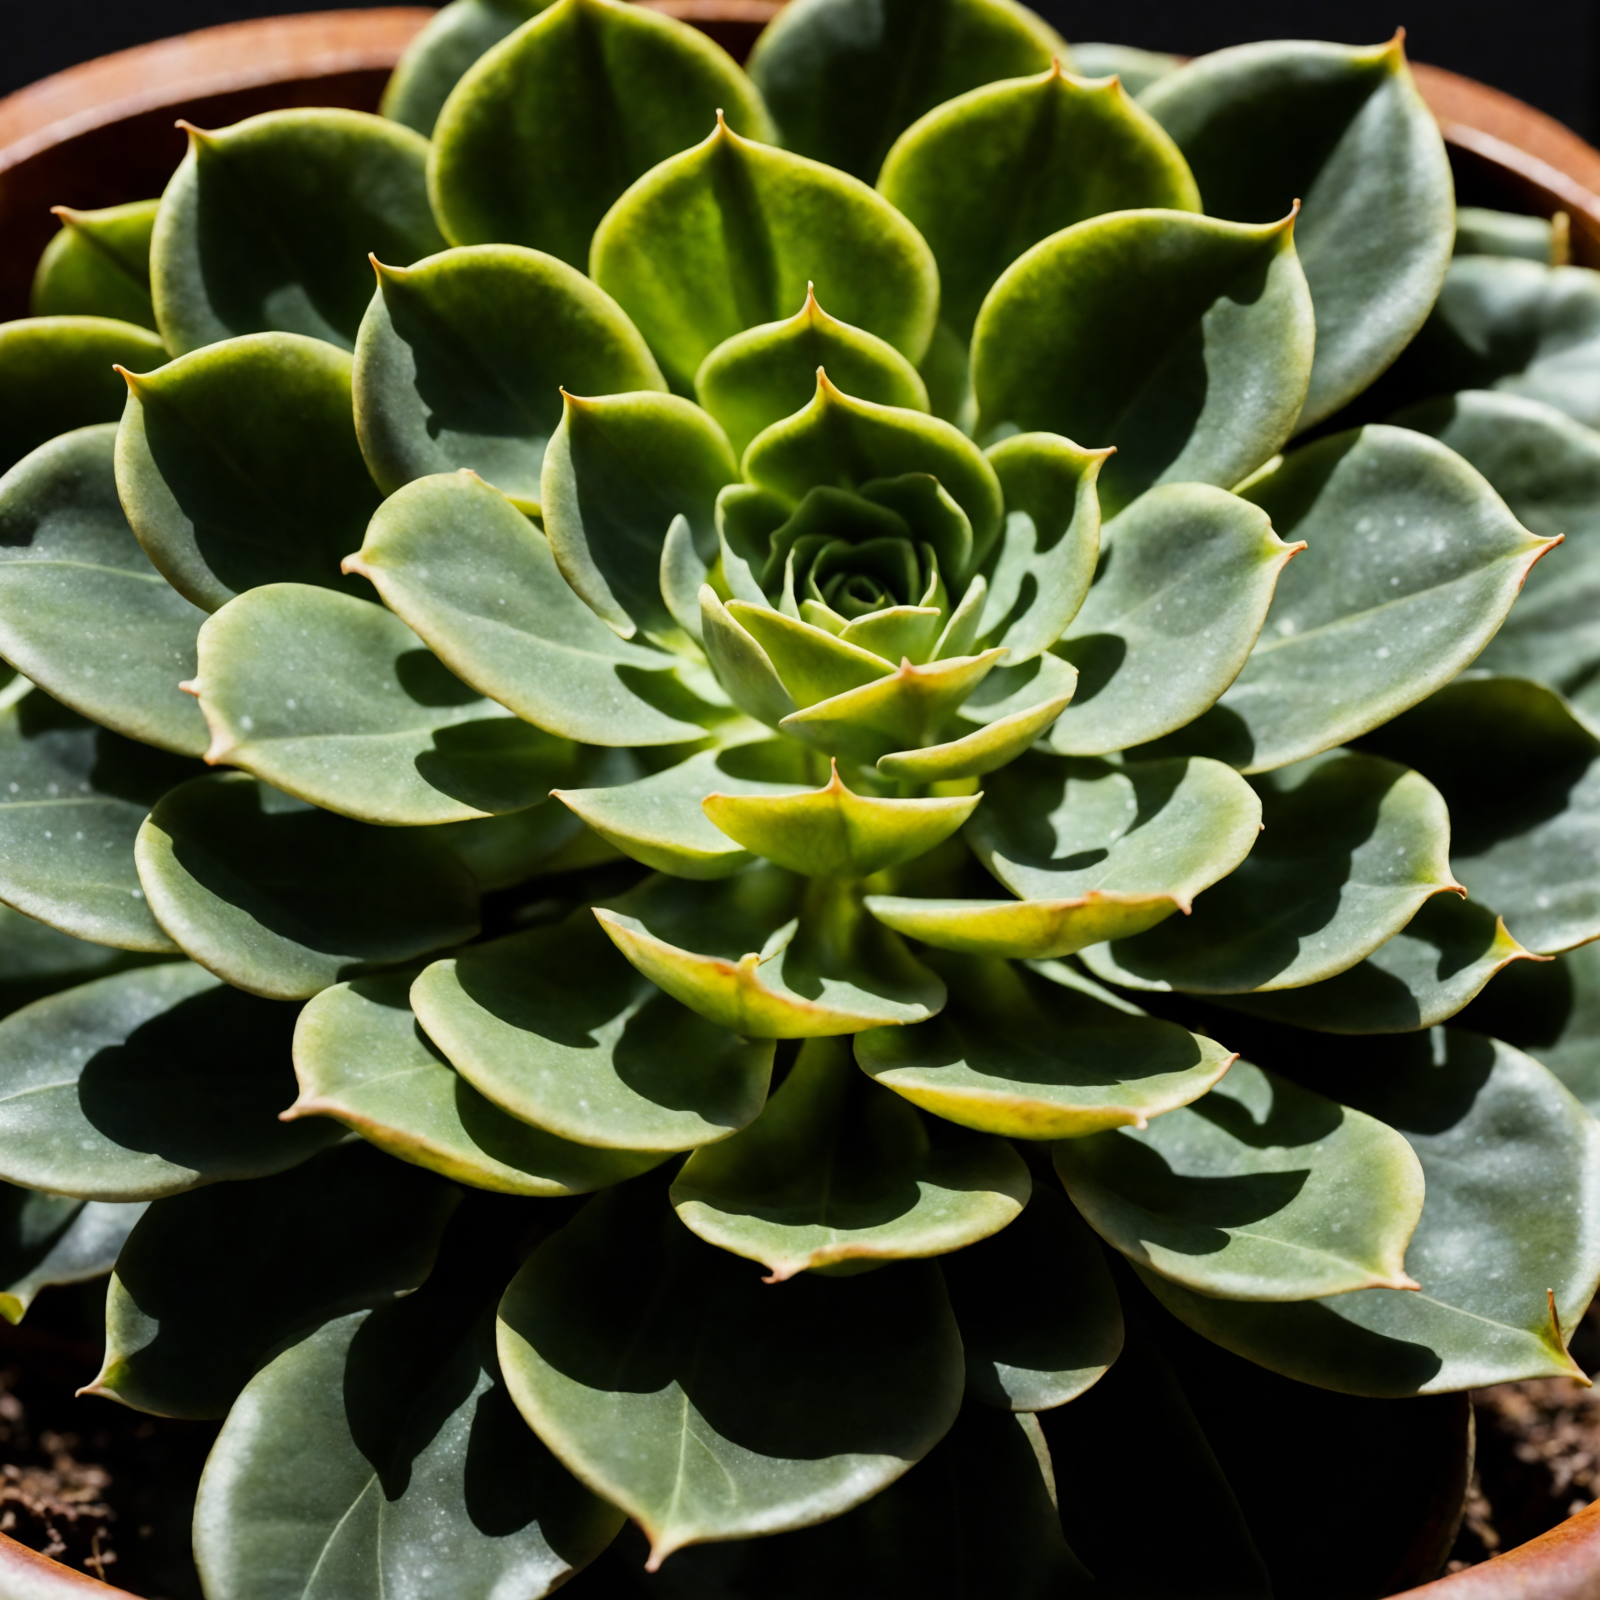 Echeveria secunda in a bowl planter, with detailed green leaves, clear indoor lighting, against a dark background.